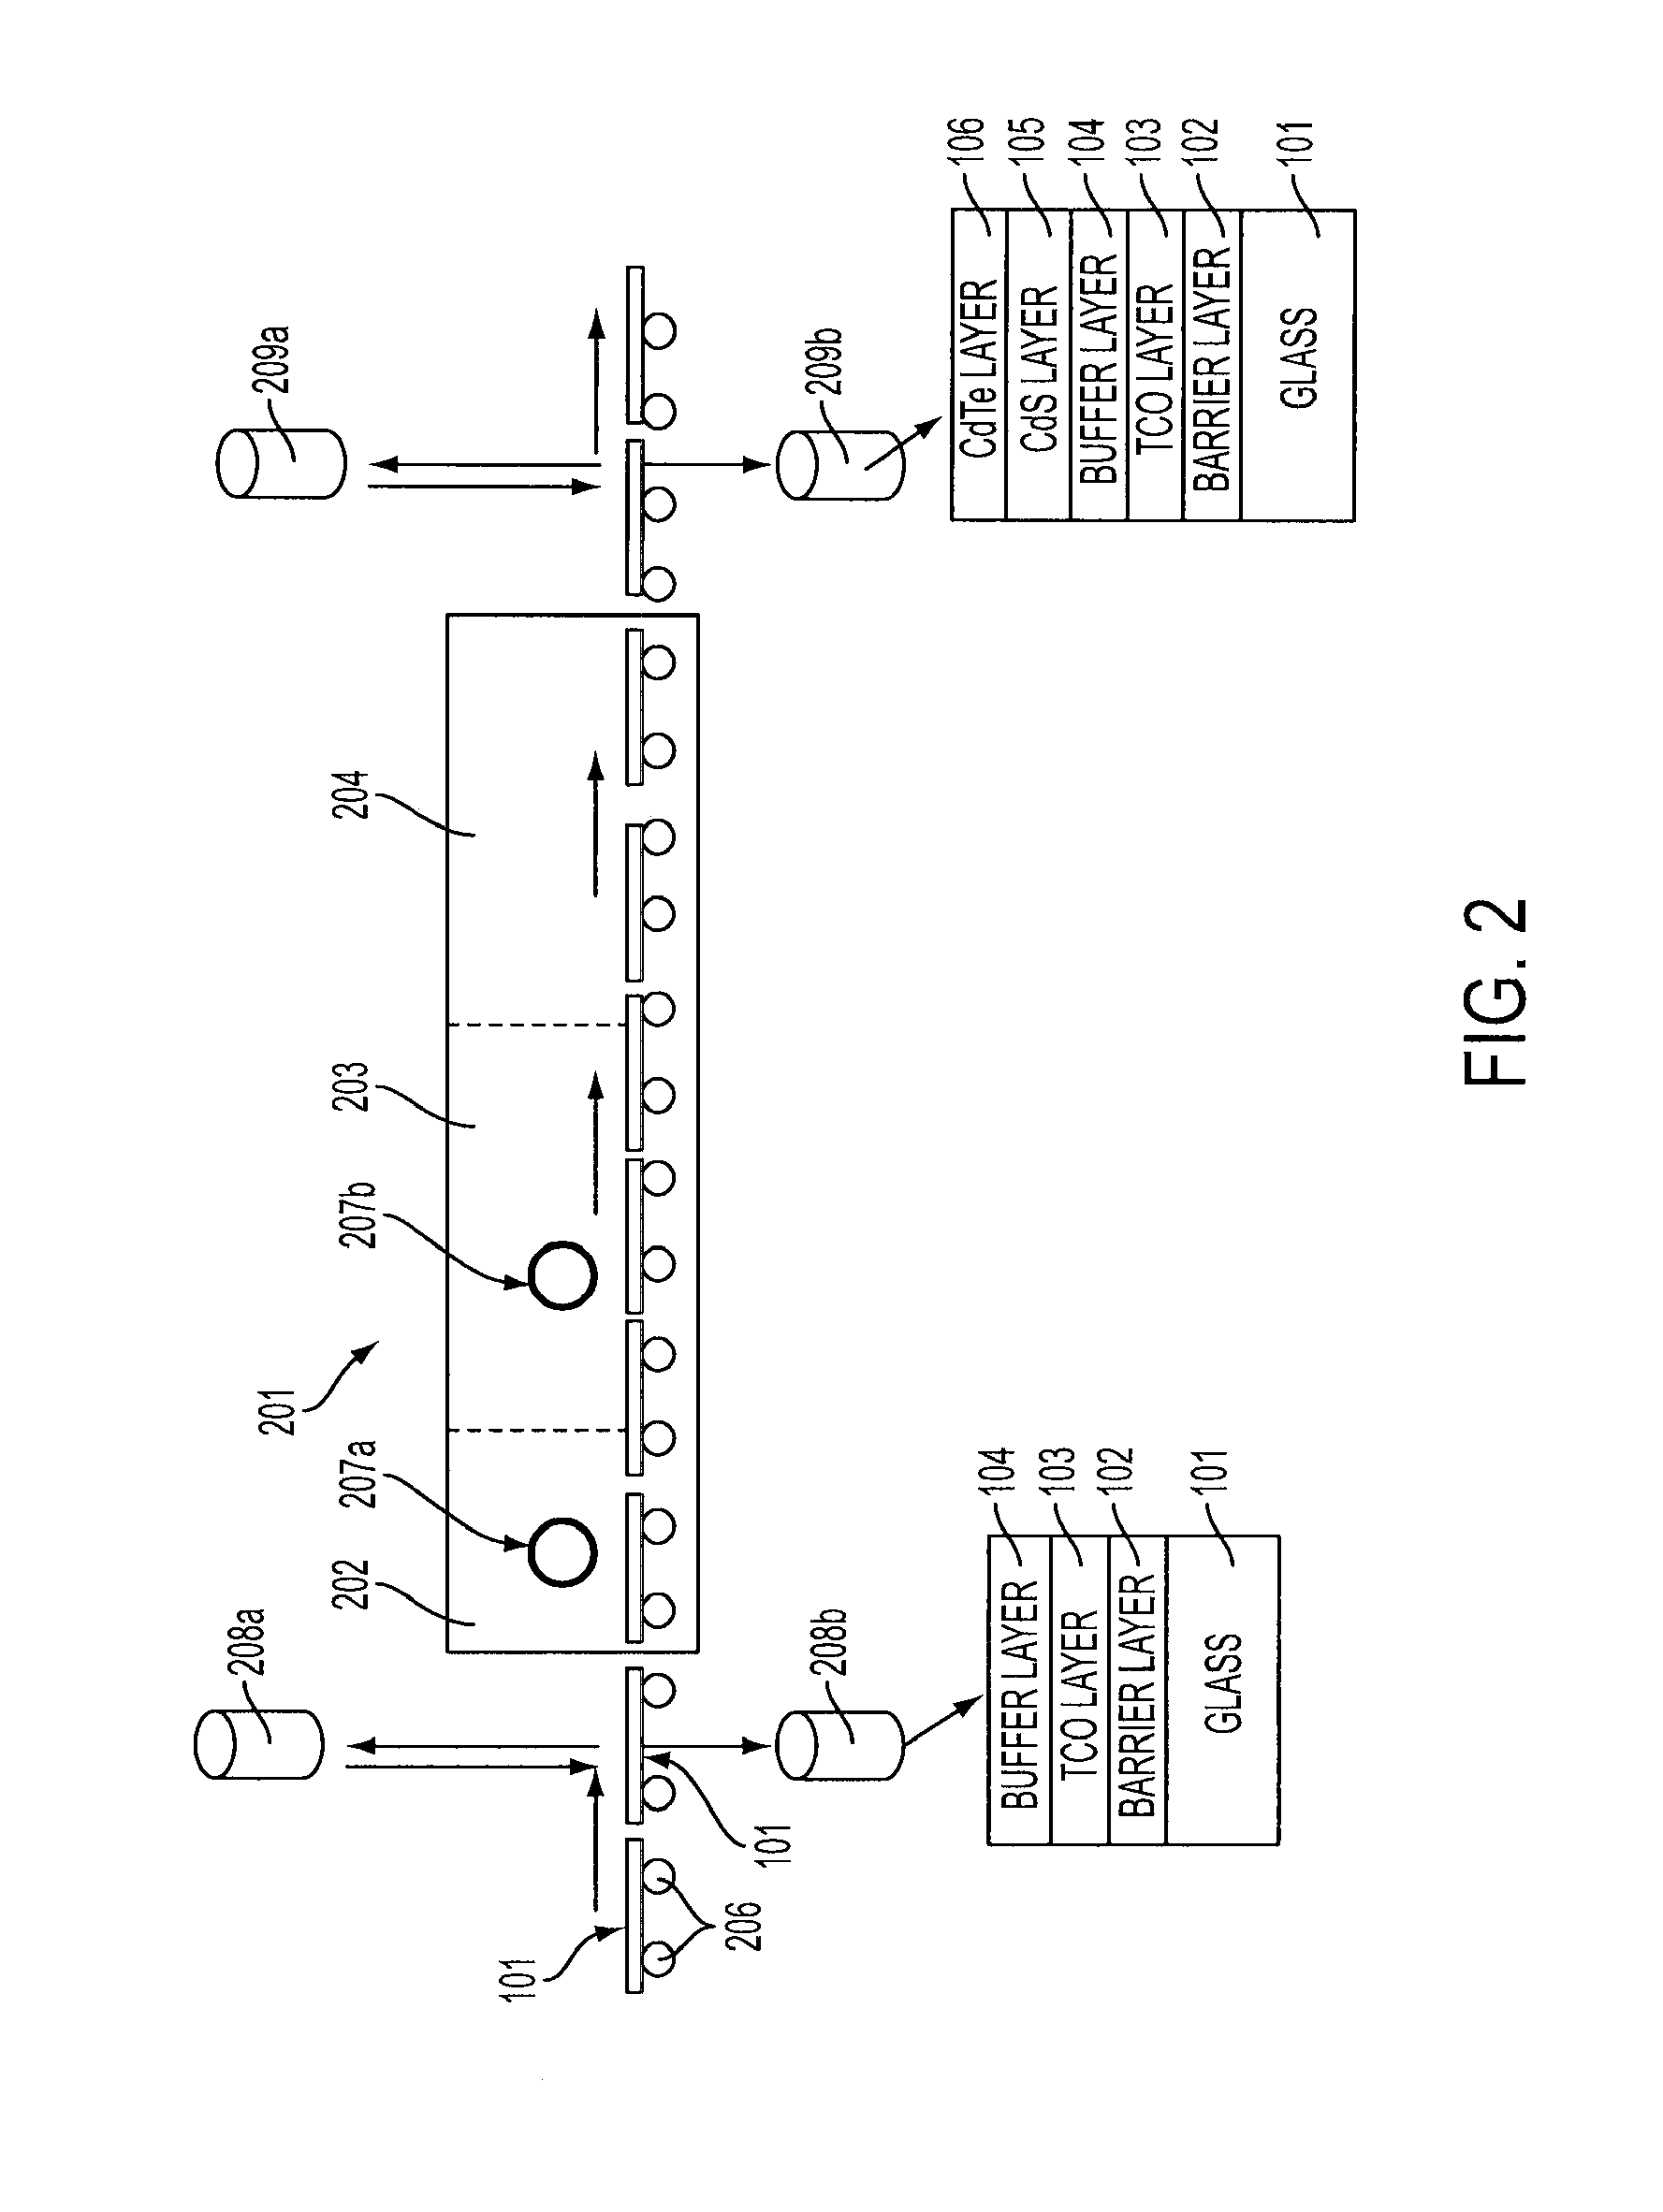 Method and system for in-line real-time calculation of thicknesses of semiconductor layers of a photovoltaic device